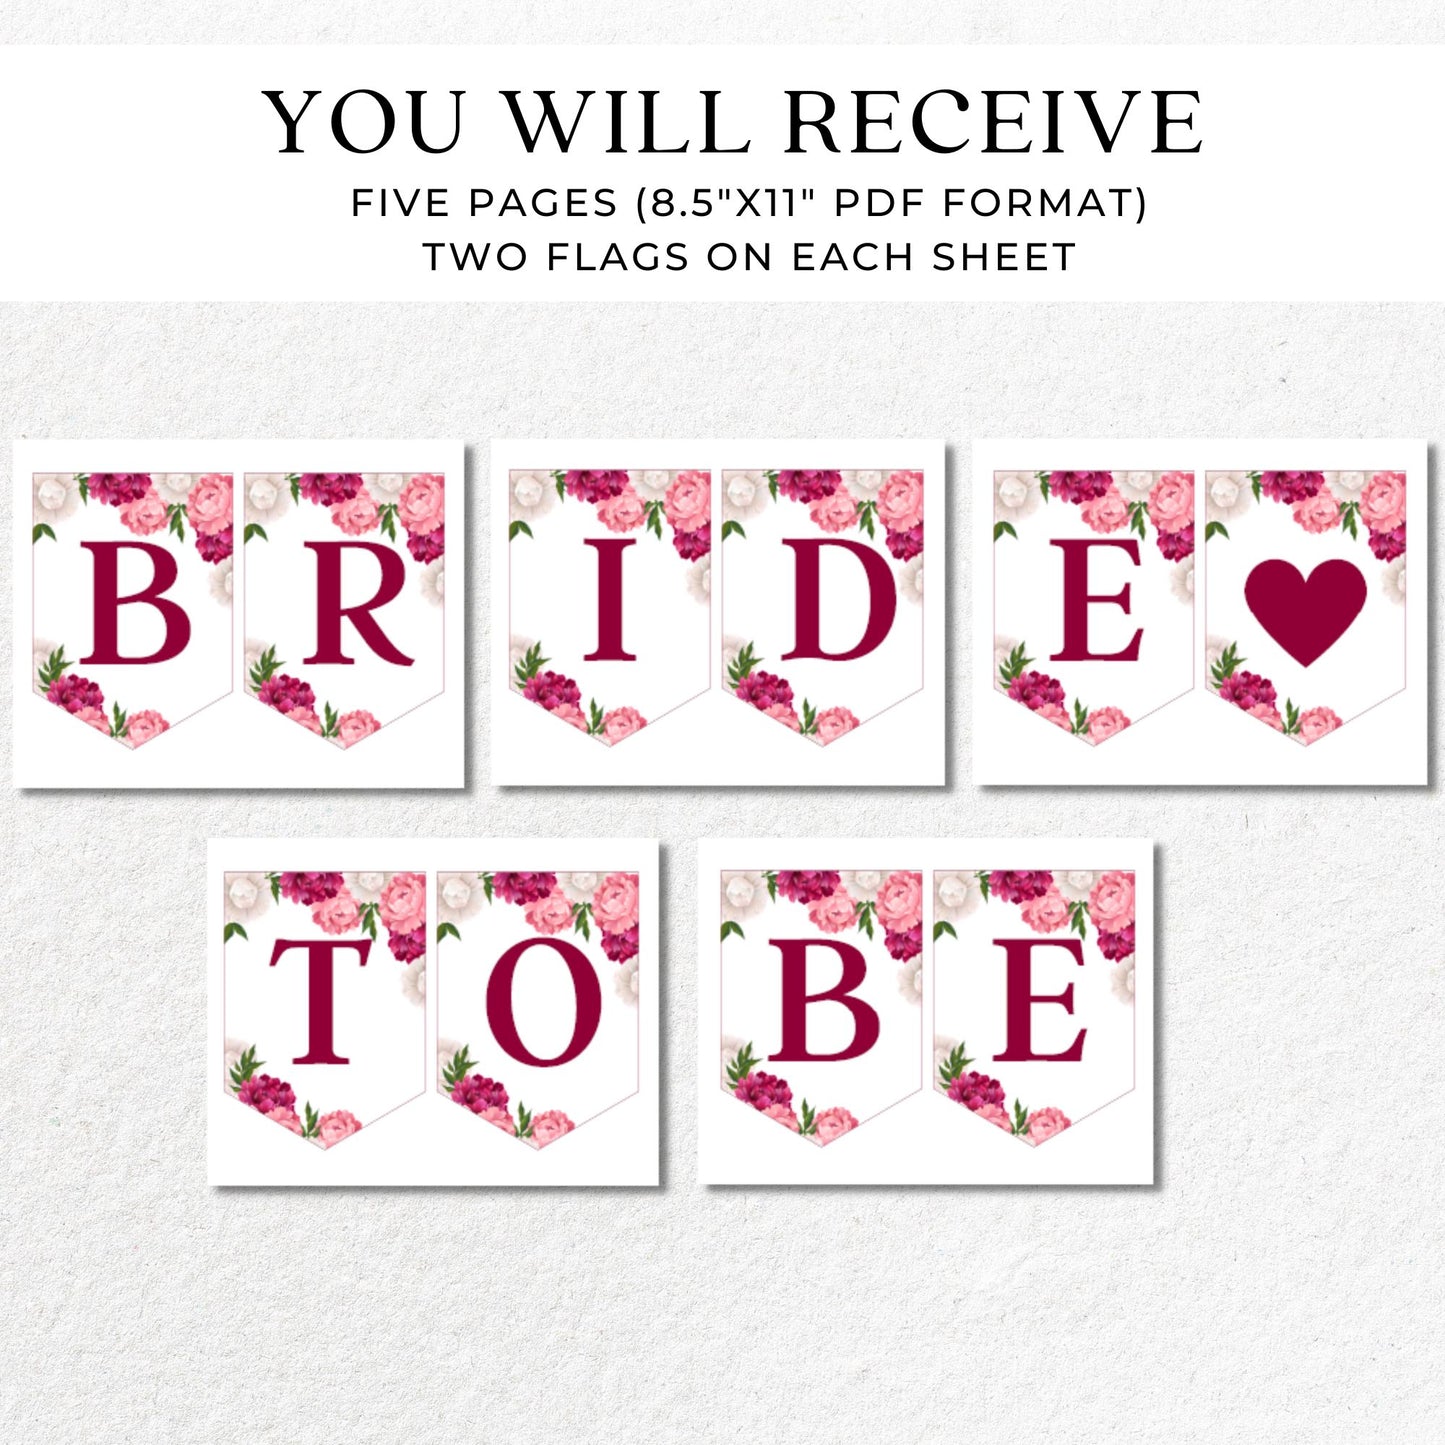 Bride To Be Printable Banner